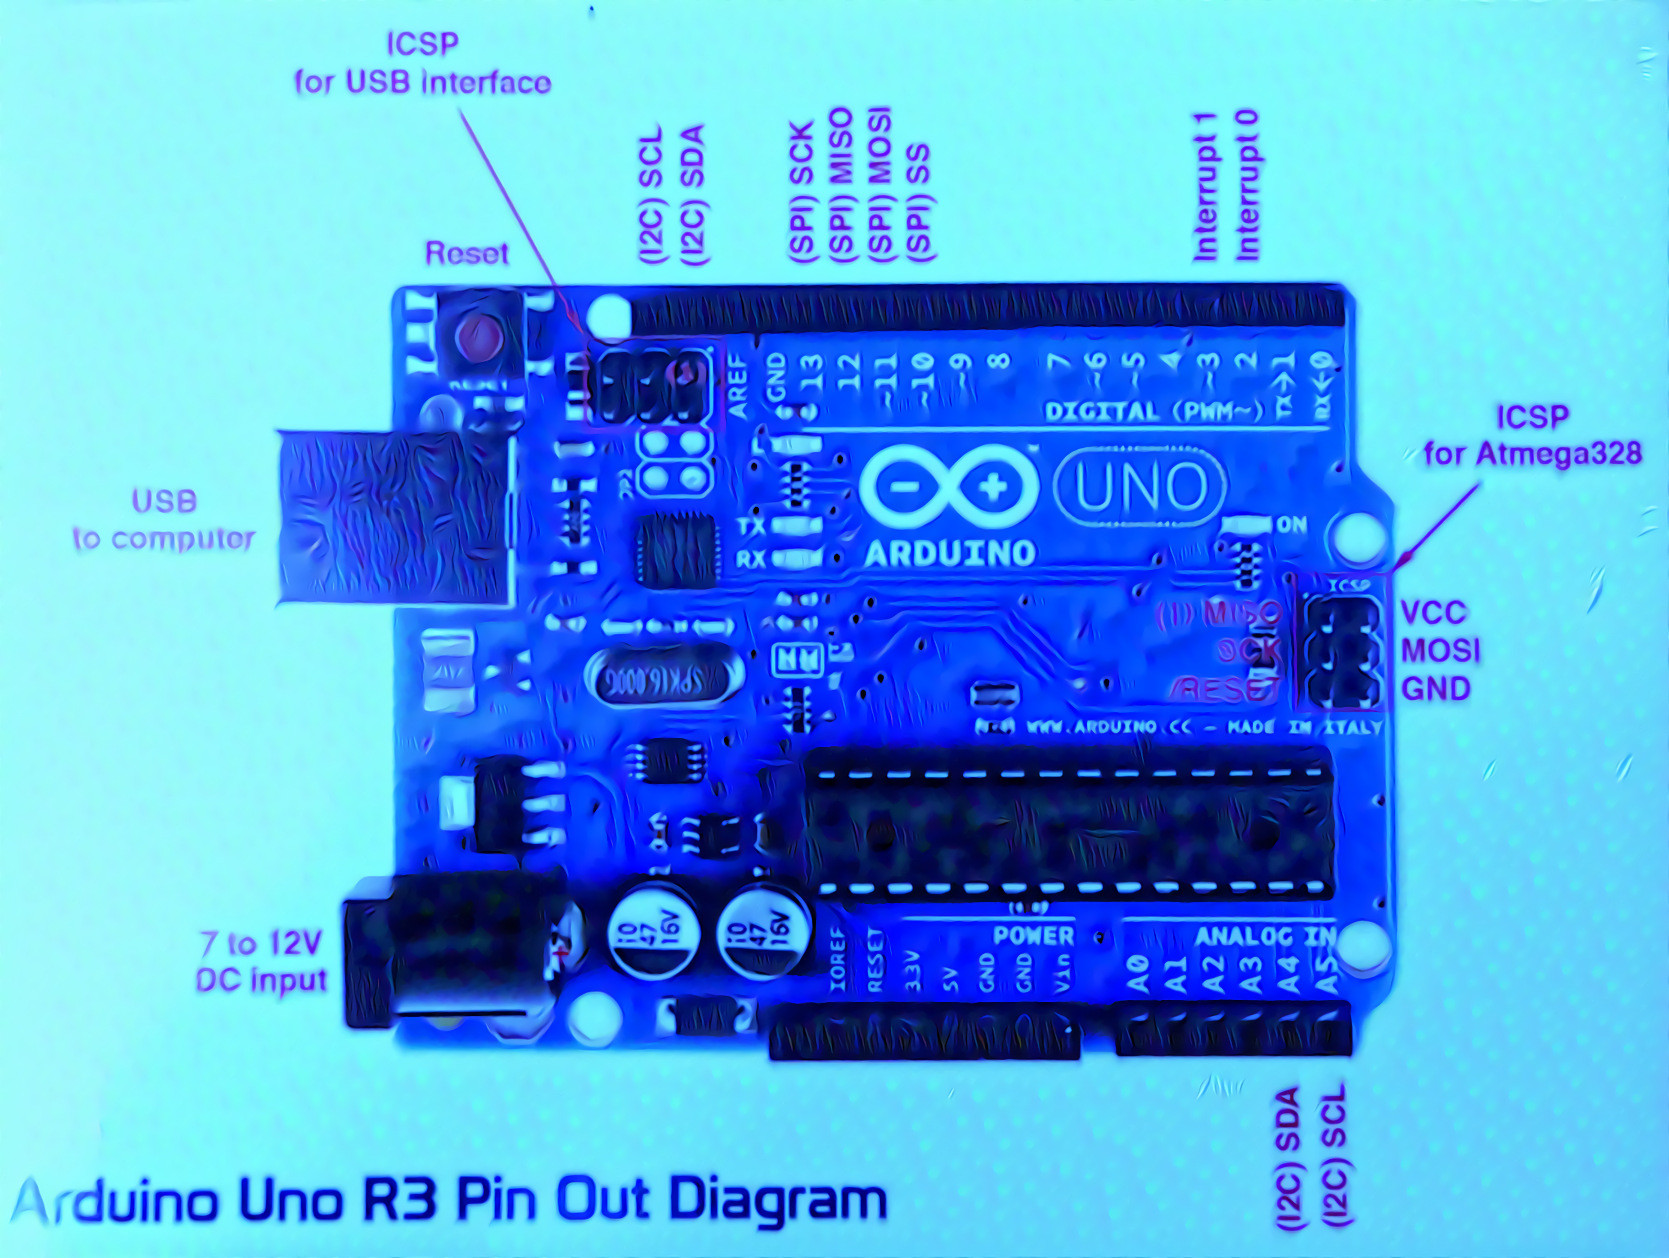 Arduino UNO Microcontroller Pinouts--Youtube:Complete Tutorial:Arduino Tutorials,(1-68) https://youtu.be/fJWR7dBuc18--CC3.0:Snewkirk7953 https://commons.wikimedia.org/w/index.php?curid=29143066